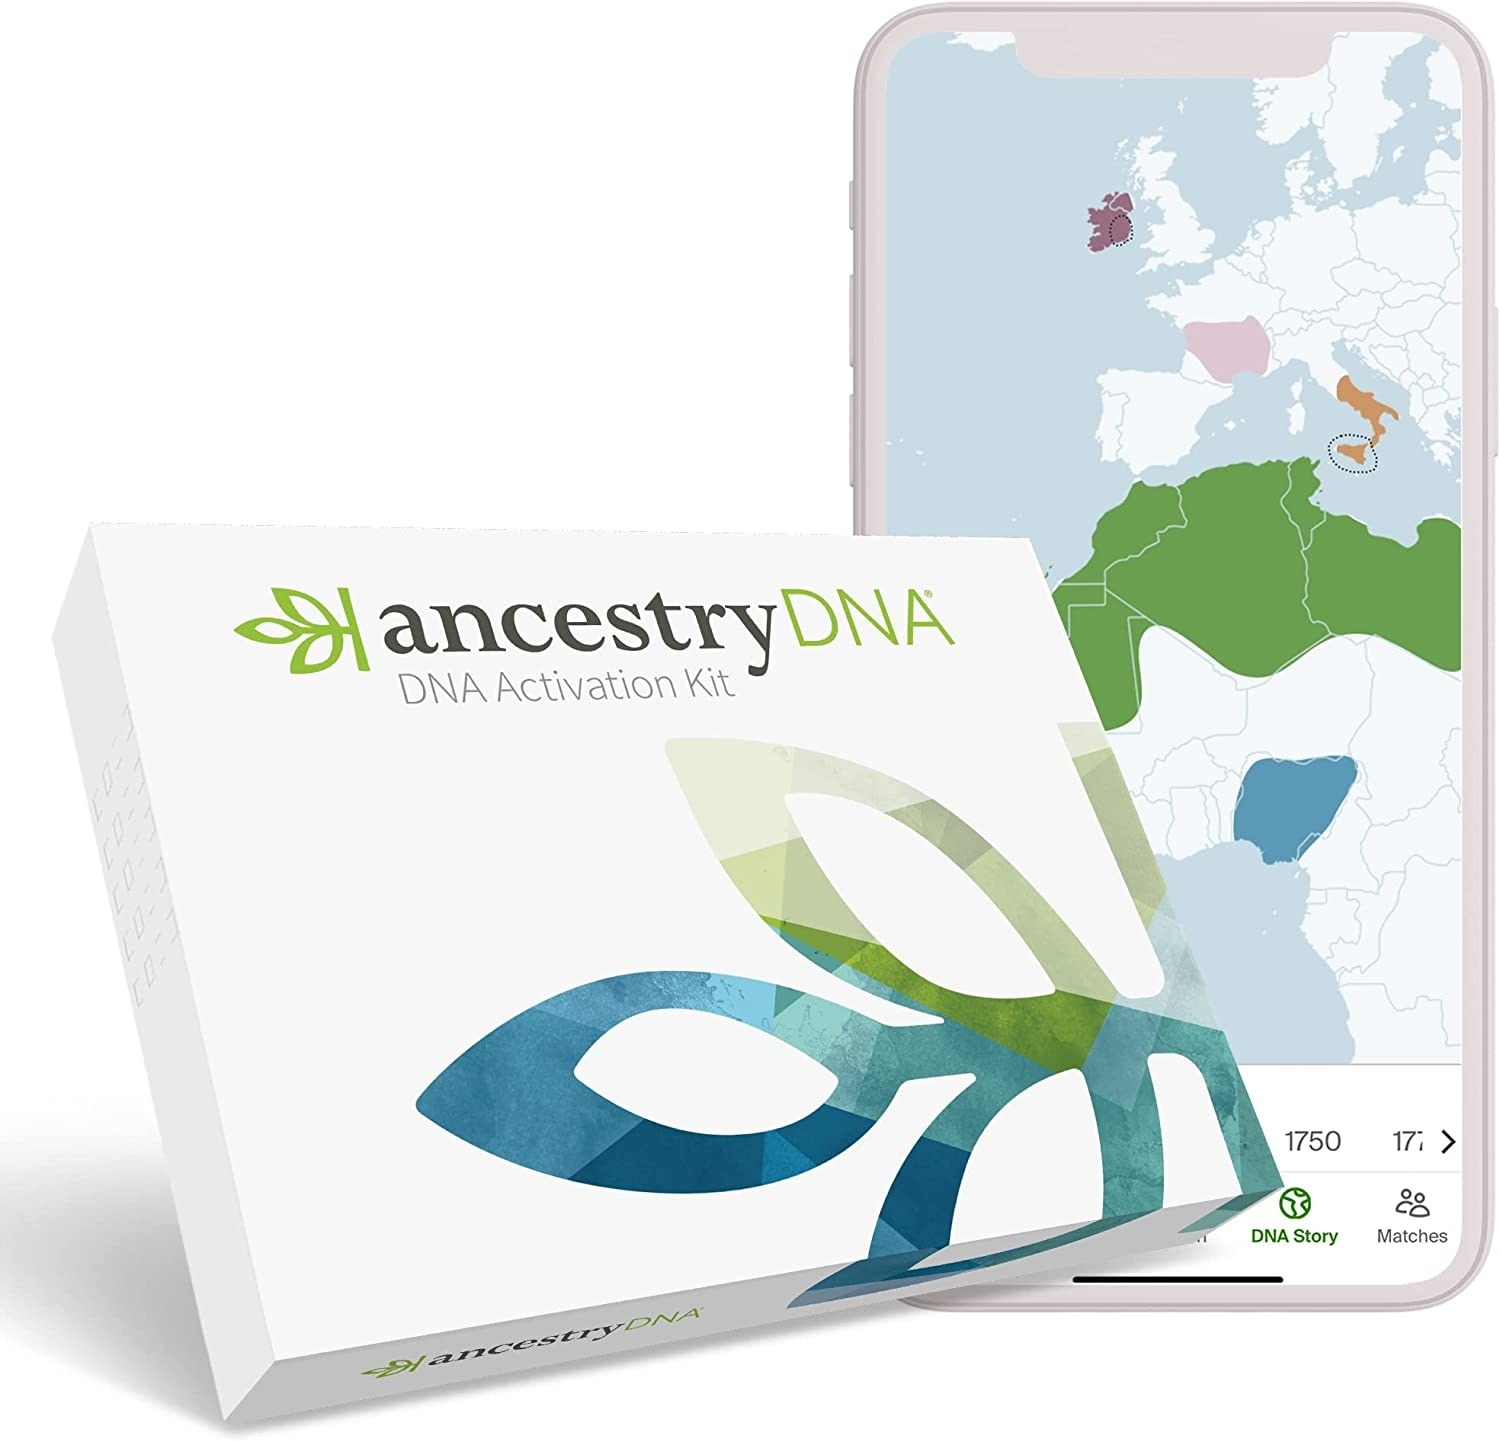 The Ancestry DNA box and a map on a phone screen